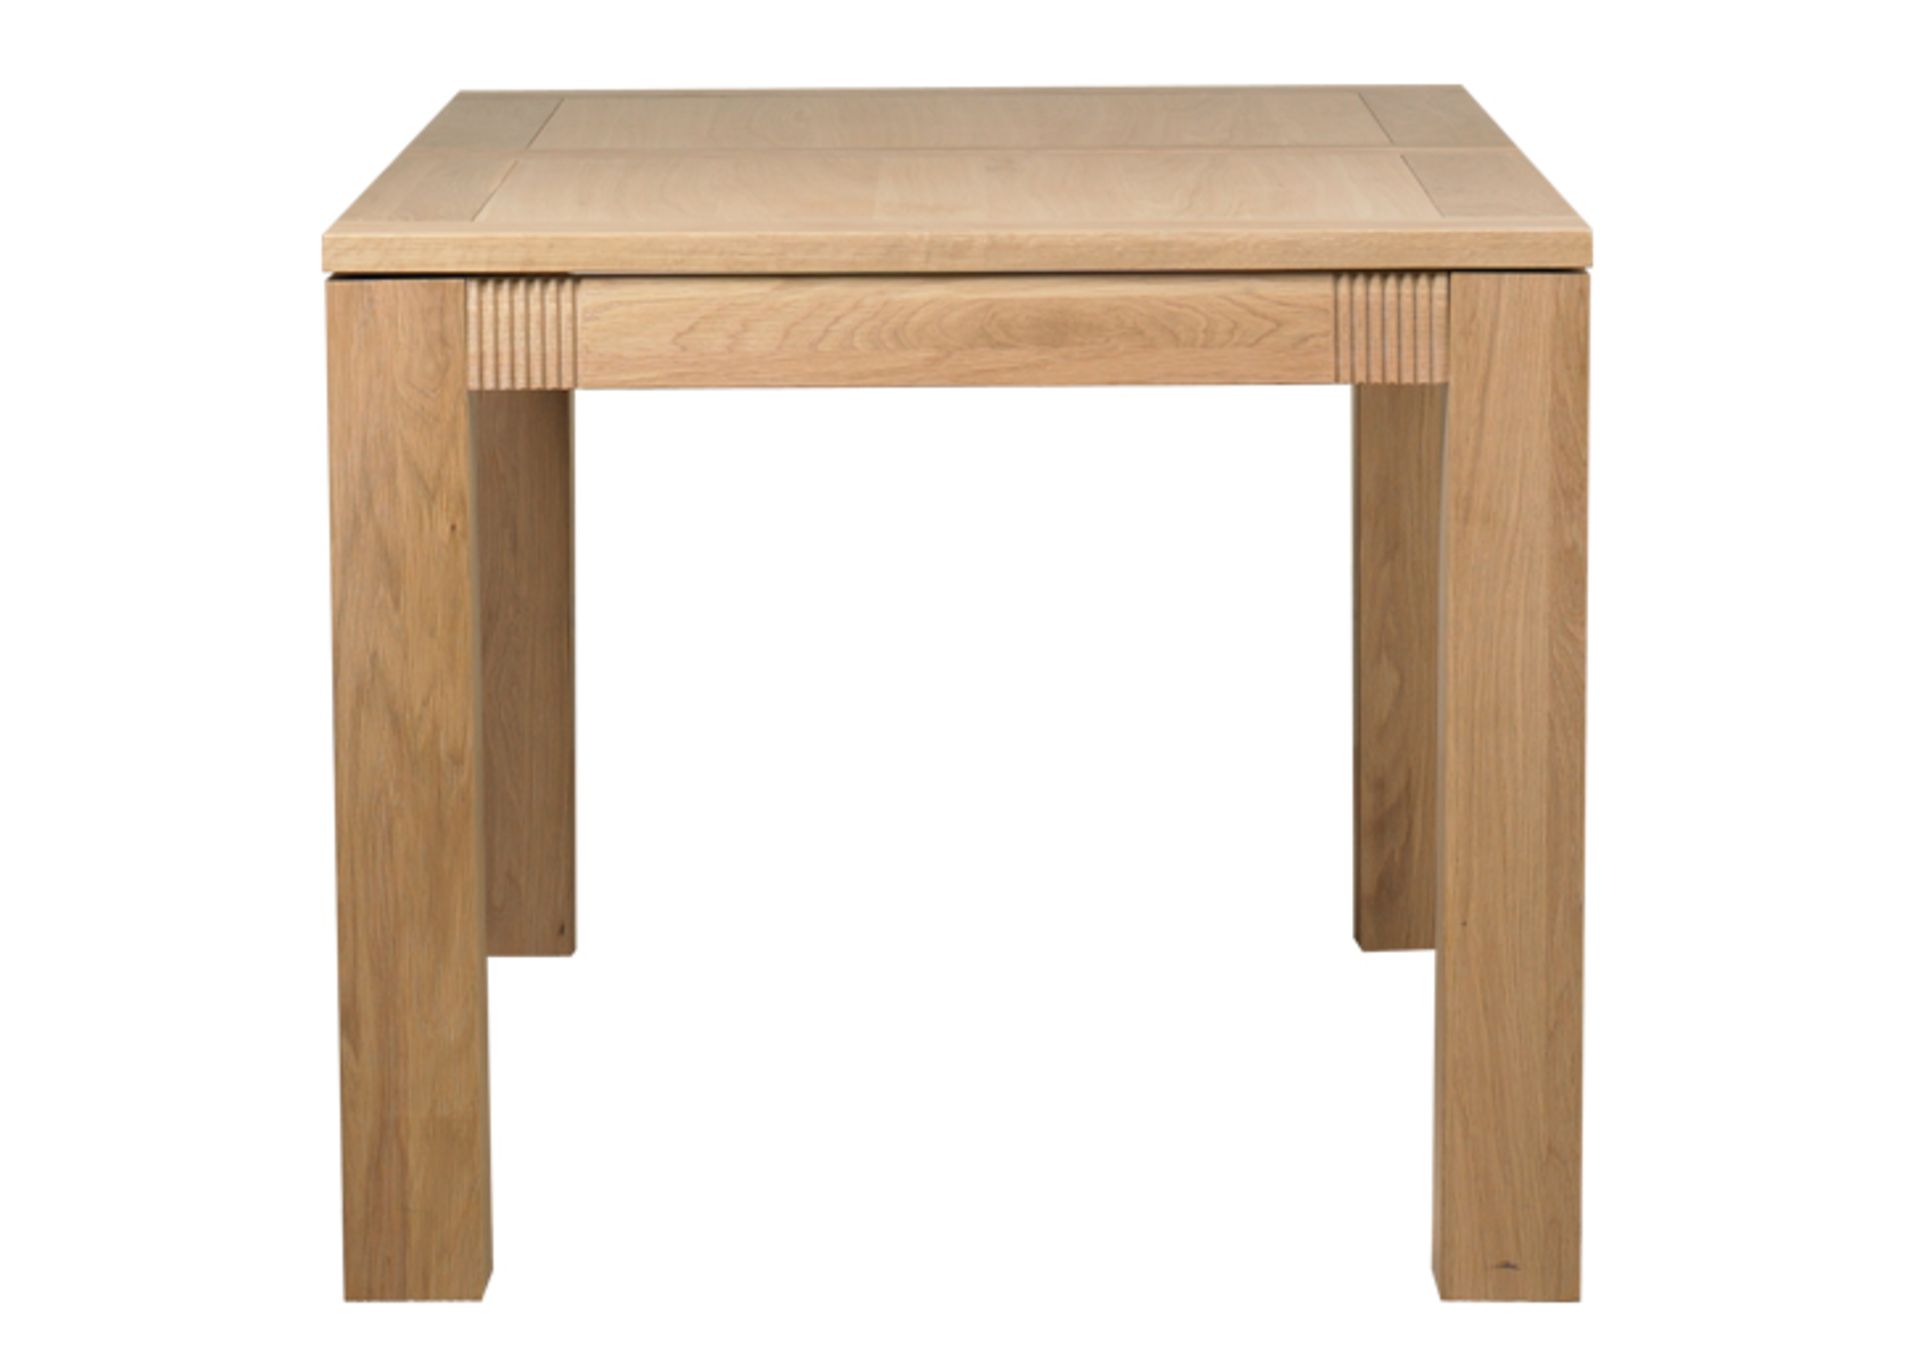 1 x Mark Webster Buckingham Small Extending Dining Table and Four High Back Chairs  - White Wash Oak - Image 8 of 9